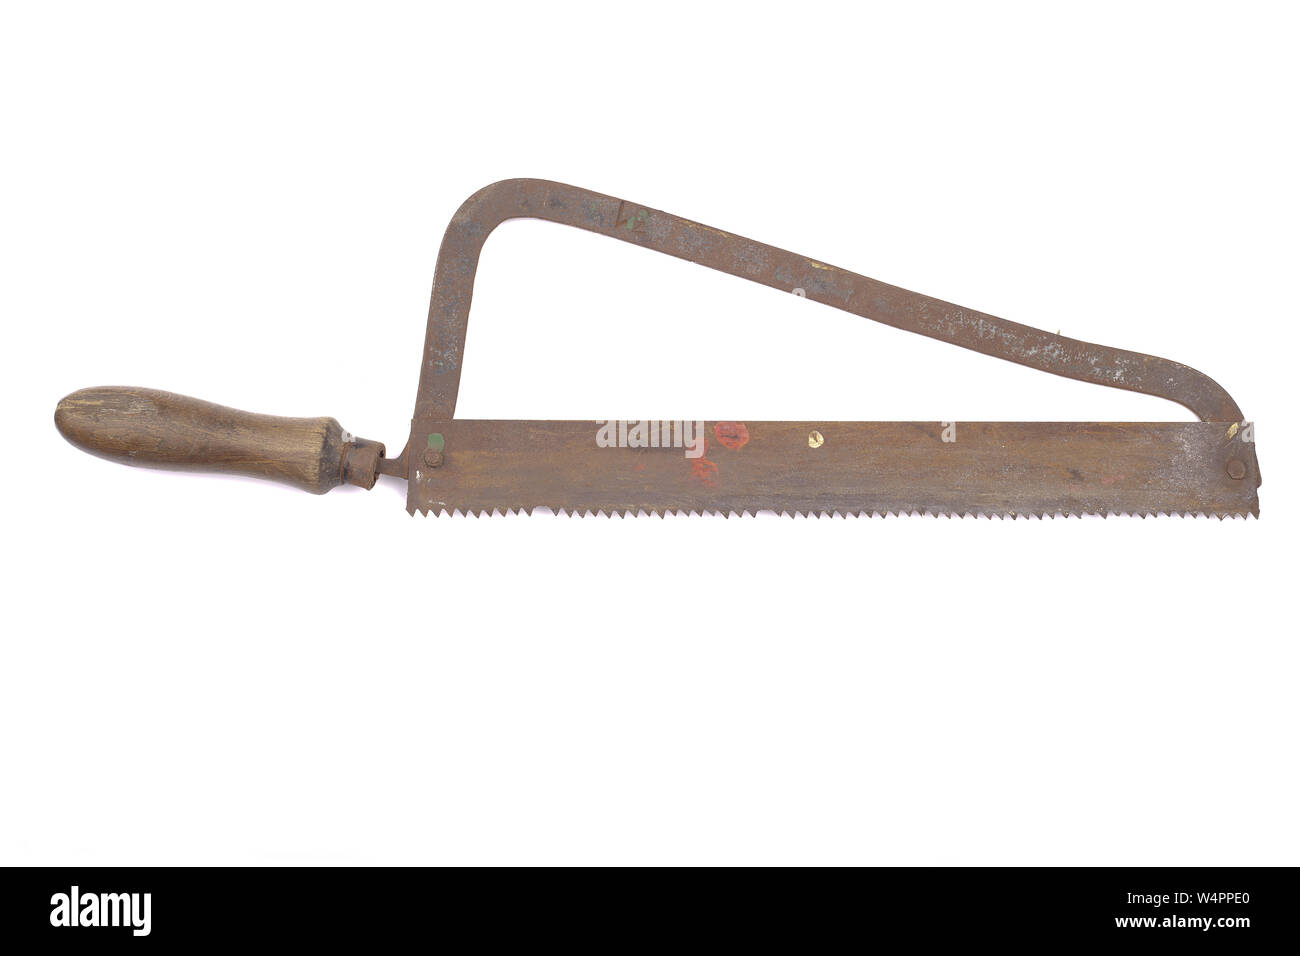 Old rusty hacksaw, isolated on white background Stock Photo